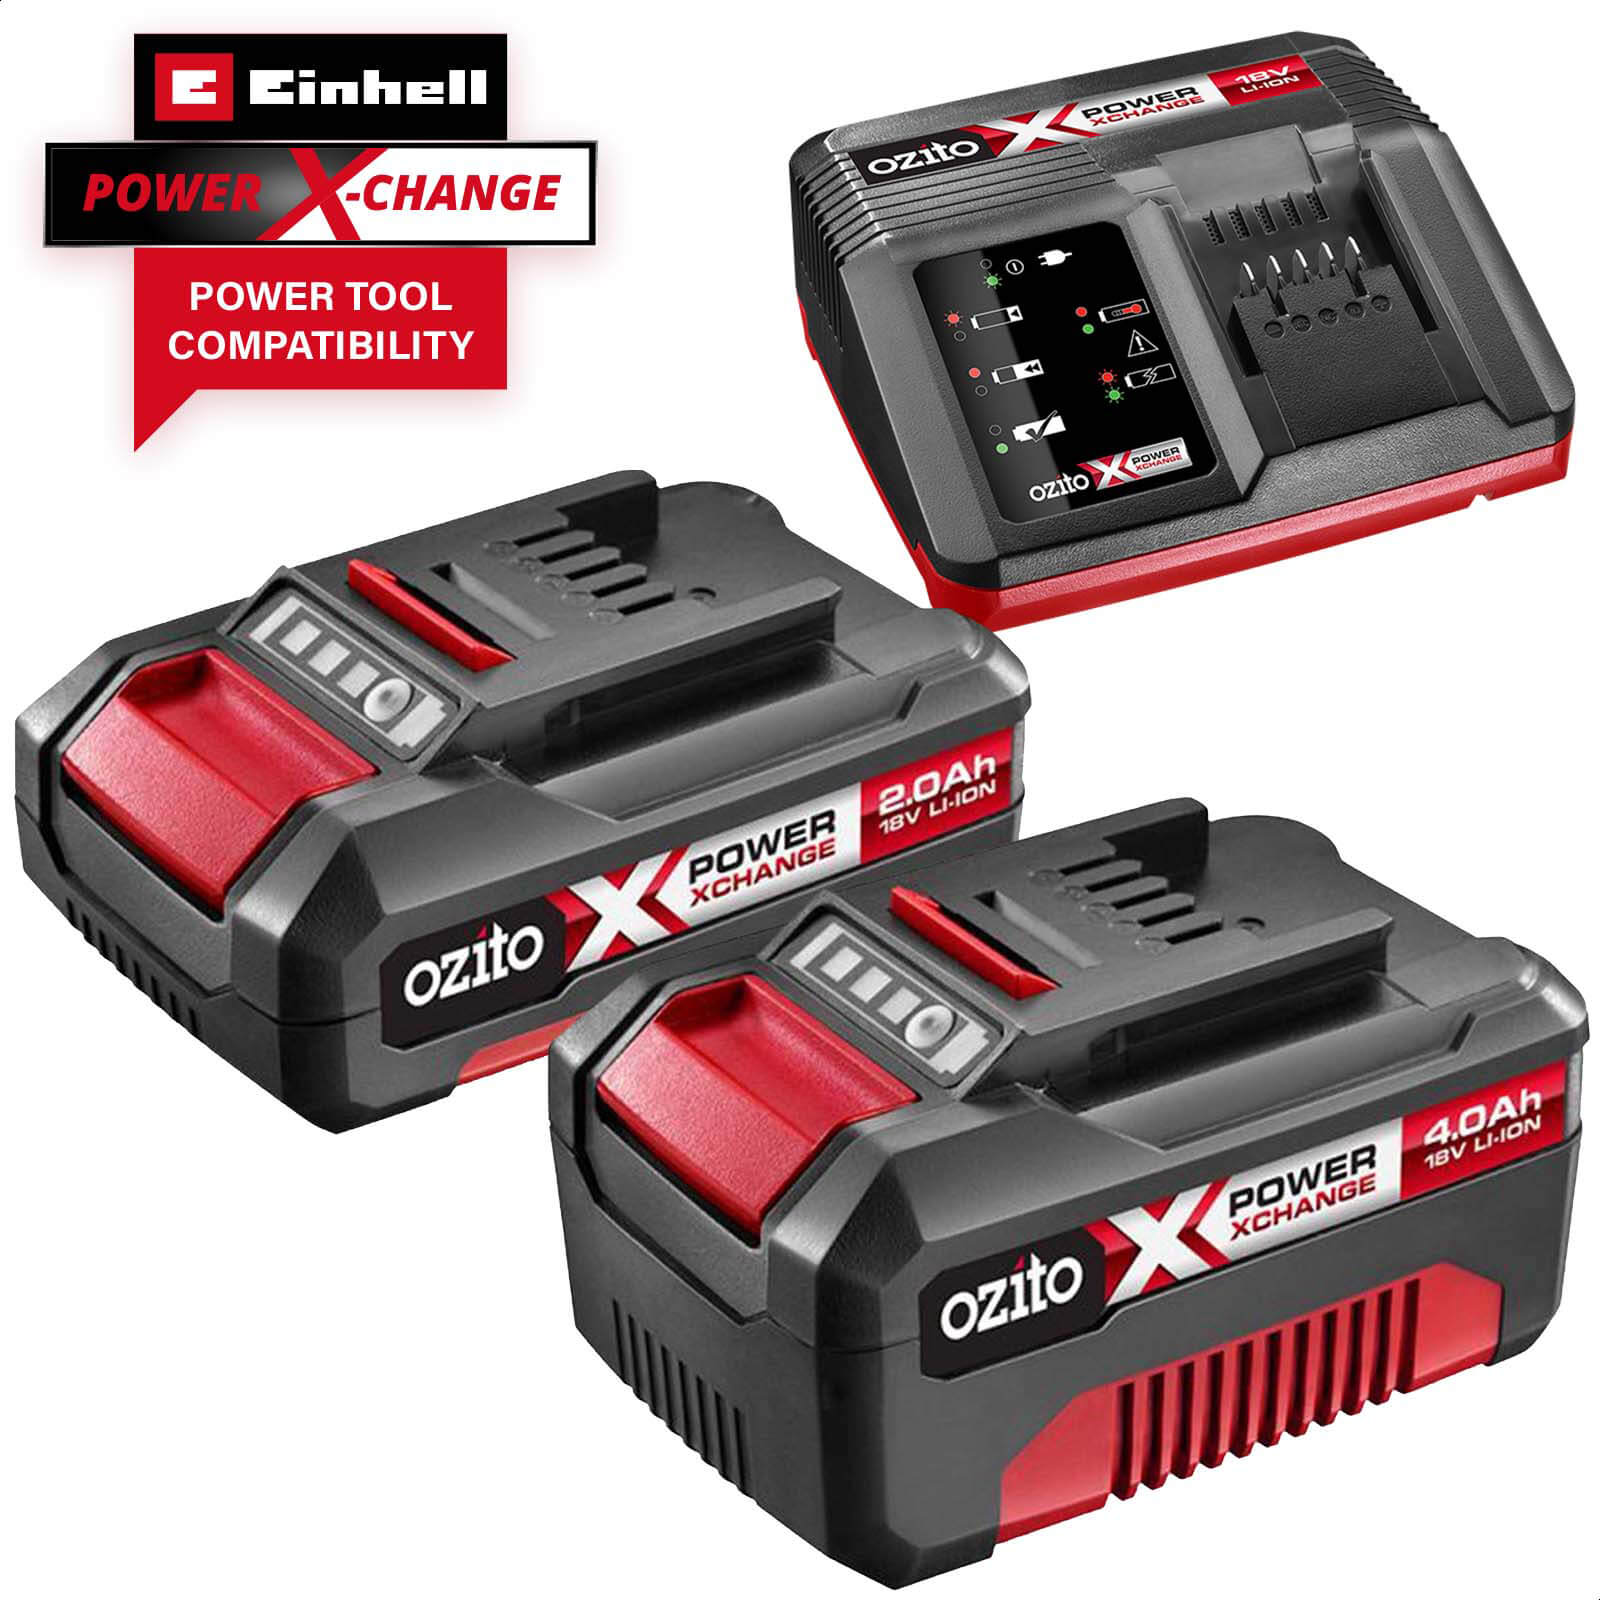 Photo of Ozito Pxbc-007u 18v Cordless Fast Power X-change Battery Charger- Battery 2ah And Battery 4ah 2ah & 4ah